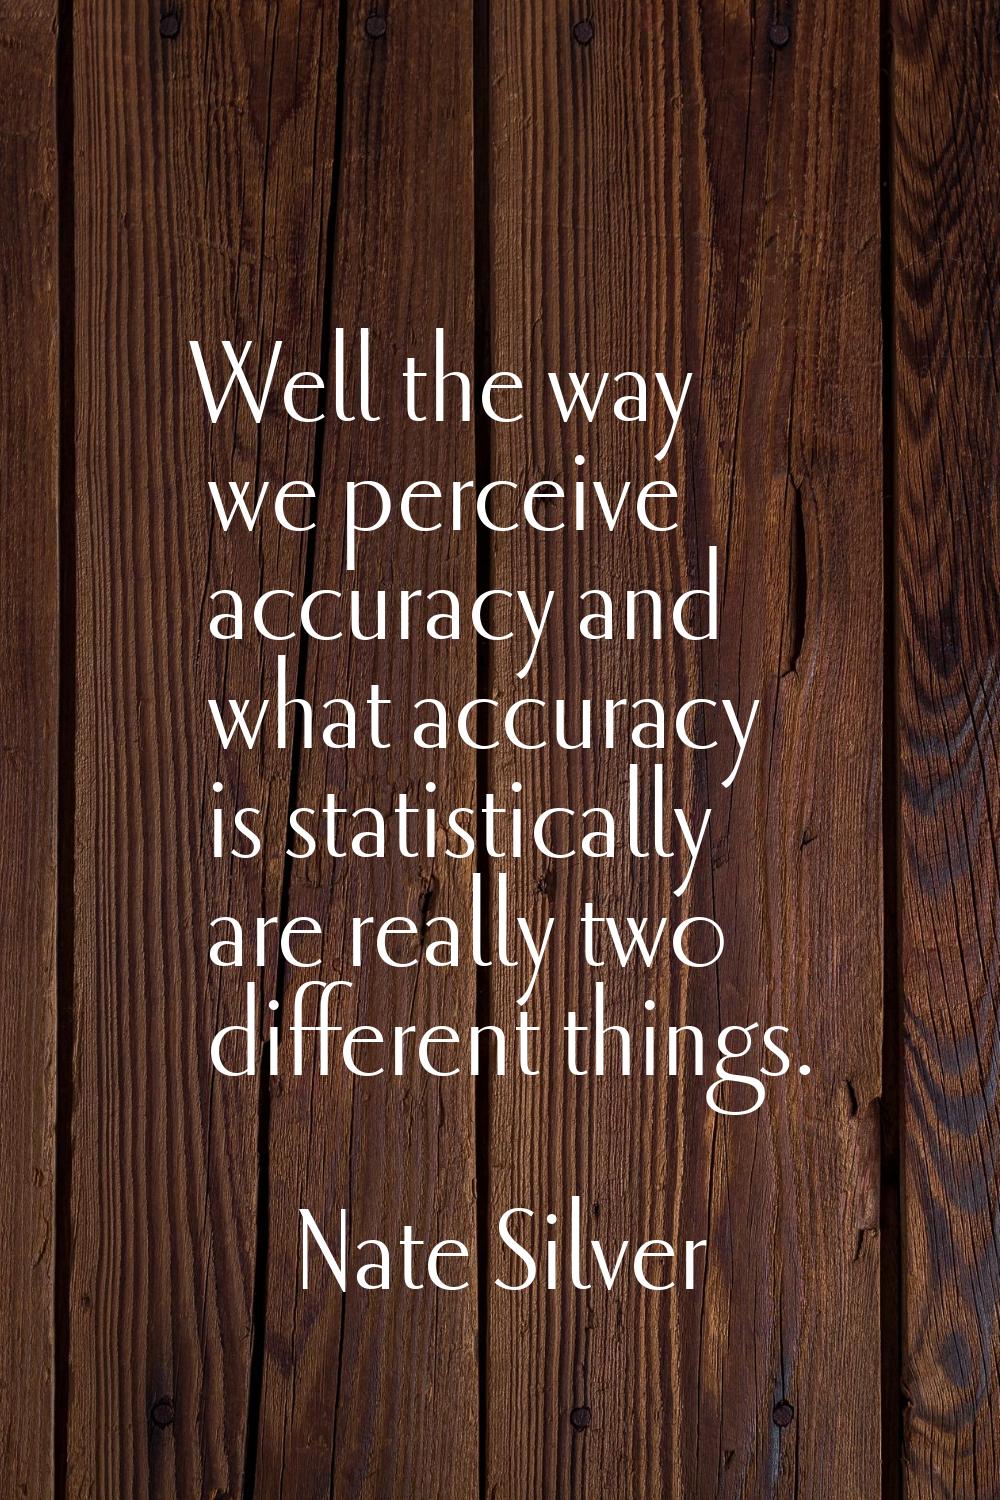 Well the way we perceive accuracy and what accuracy is statistically are really two different thing